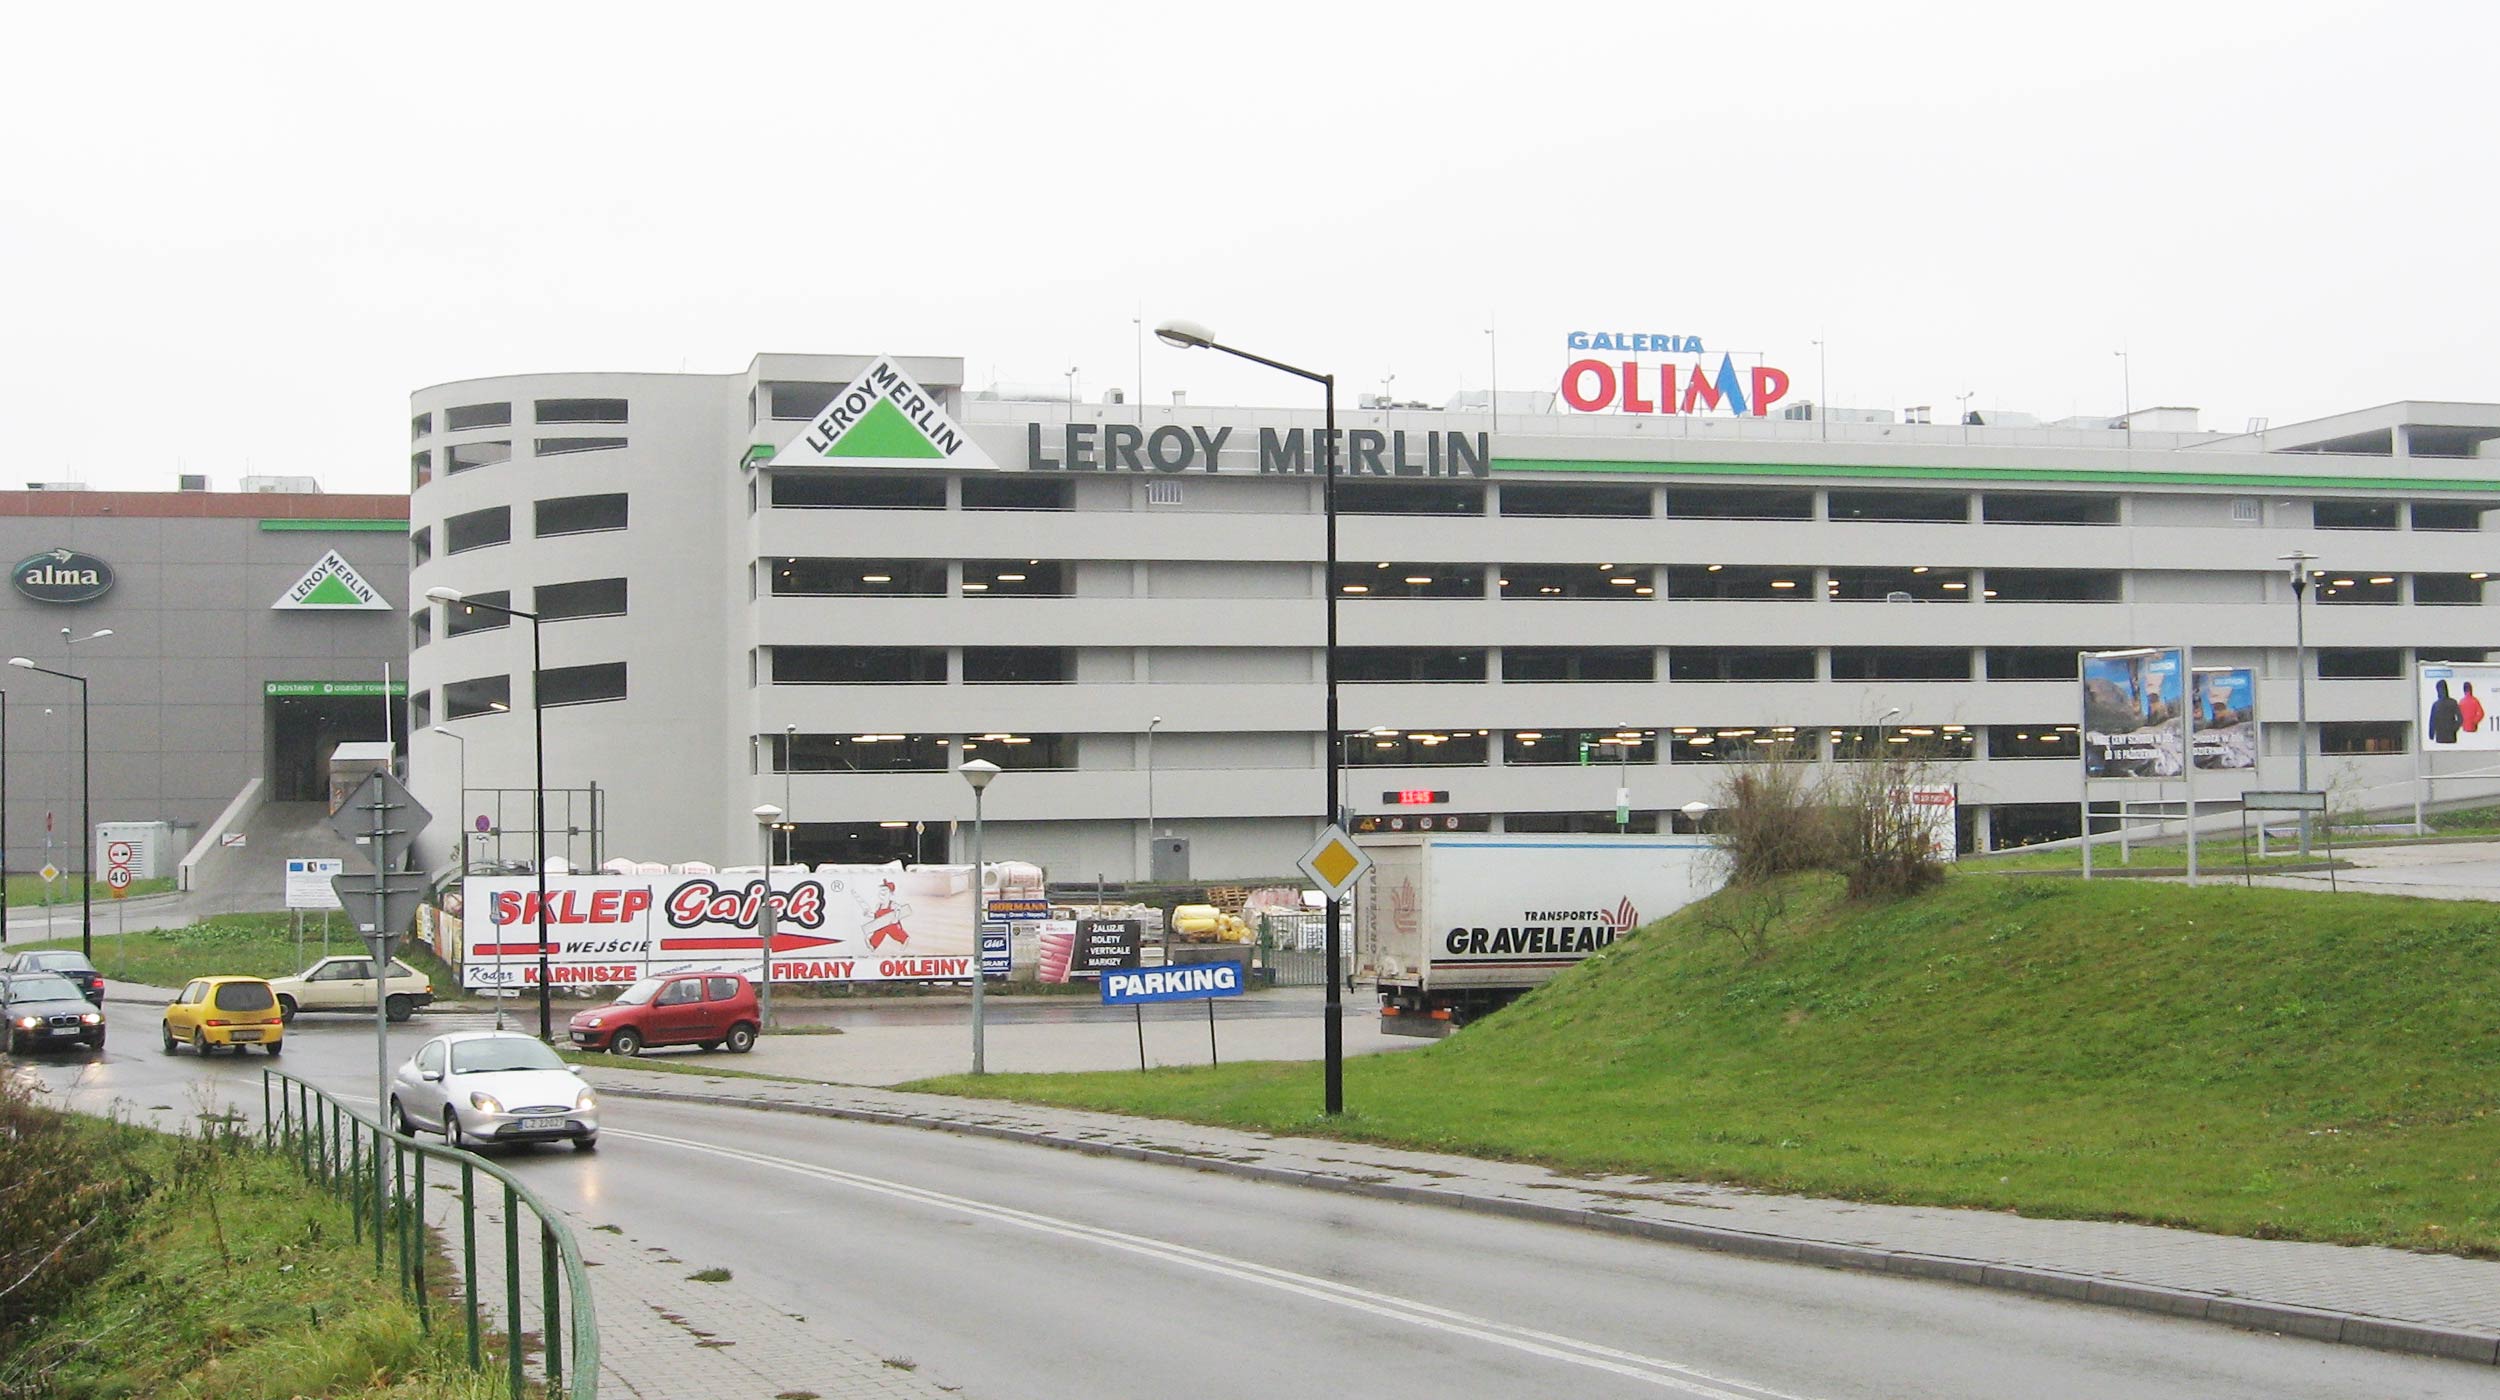 The largest shopping mall in the province of Lublin, with a total surface area of 126,000 m².